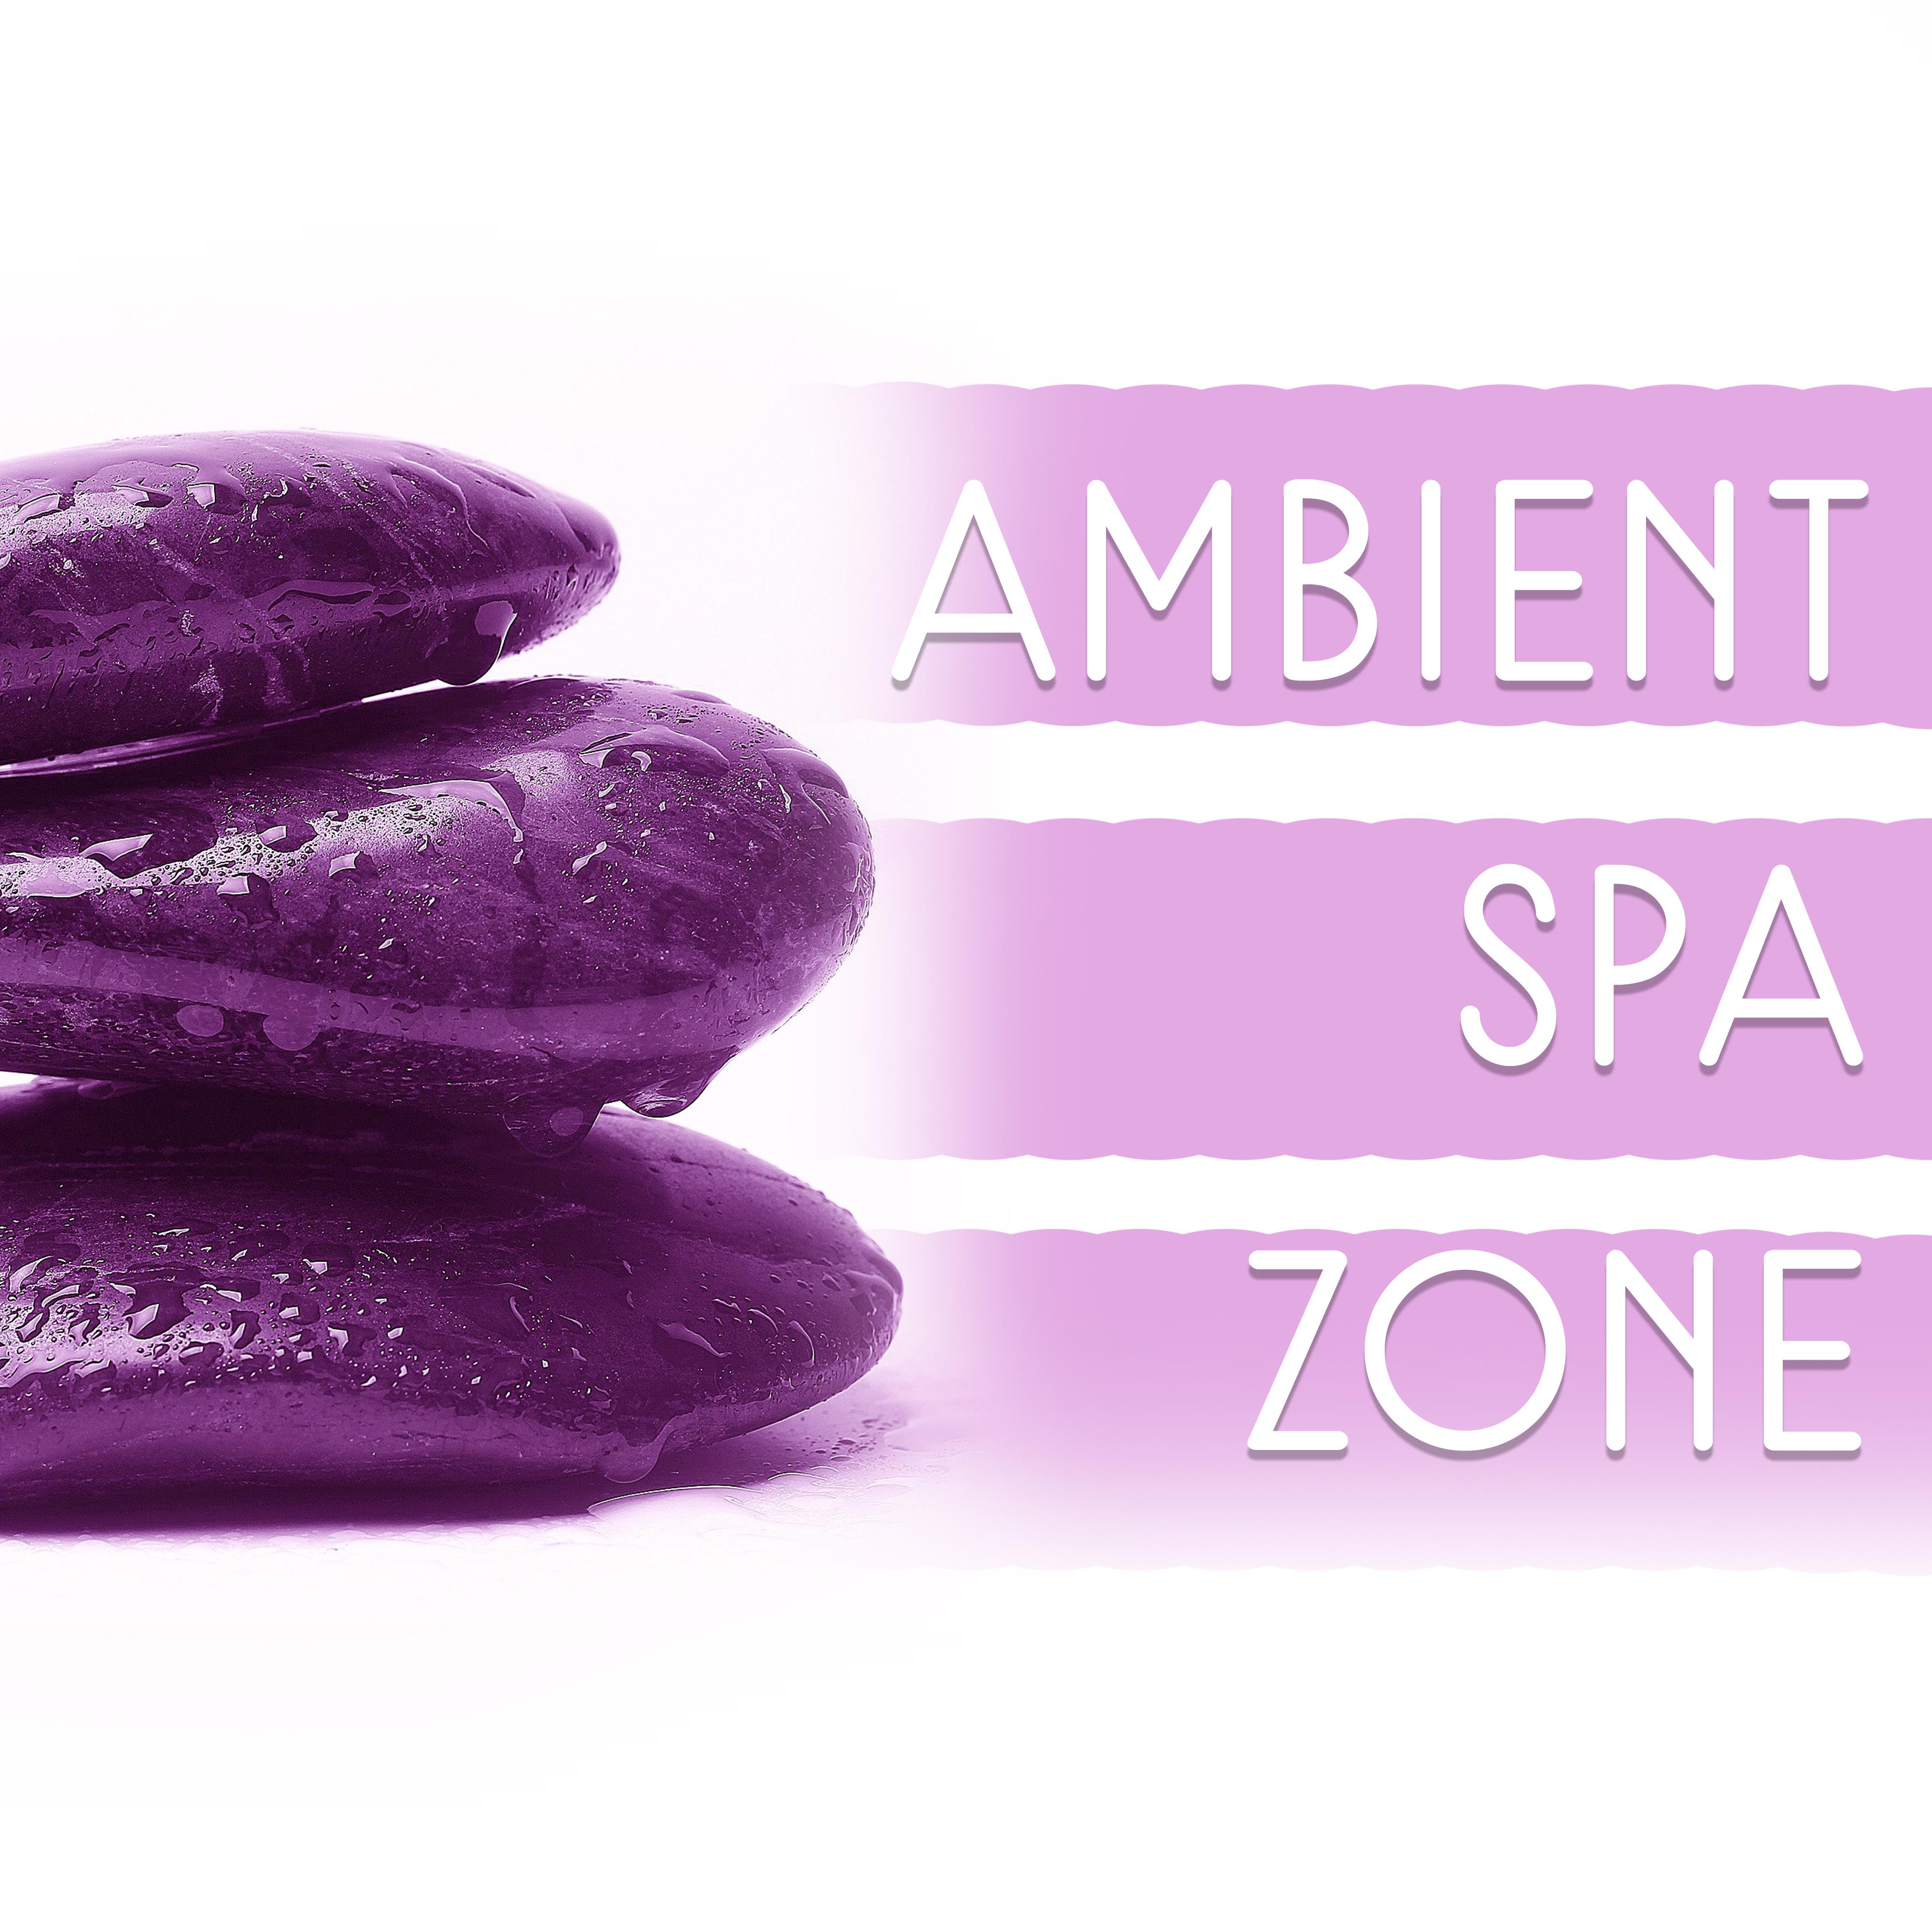 Ambient Spa Zone – Relaxing Music, Calming Sounds of Nature, Healing Music, Zen, Serenity Spa, Massage